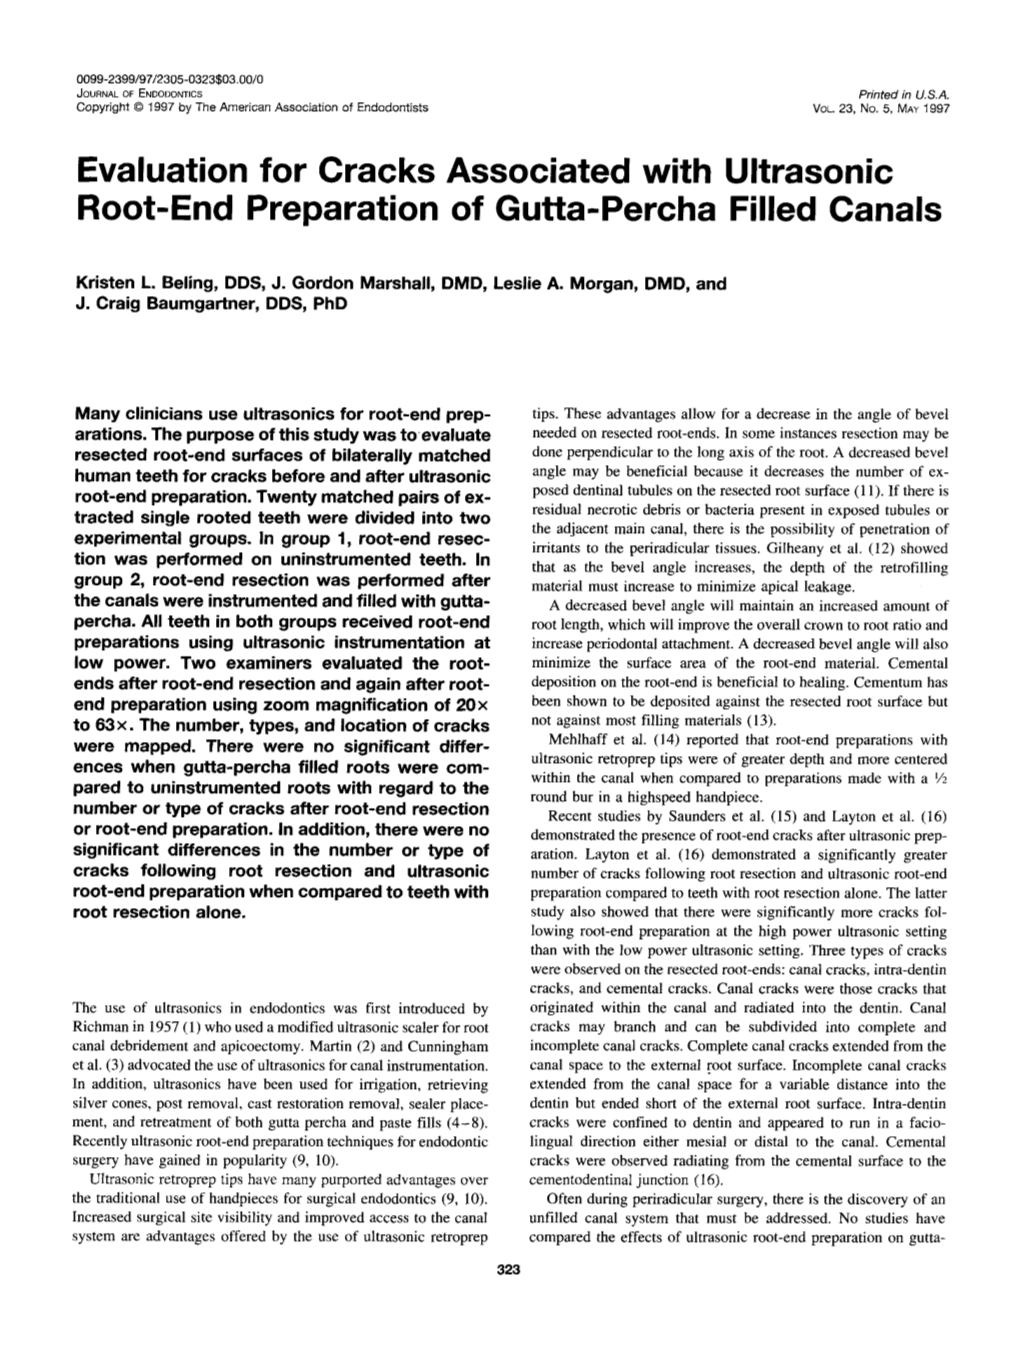 Evaluation for Cracks Associated with Ultrasonic Root-End Preparation of Gutta-Percha Filled Canals